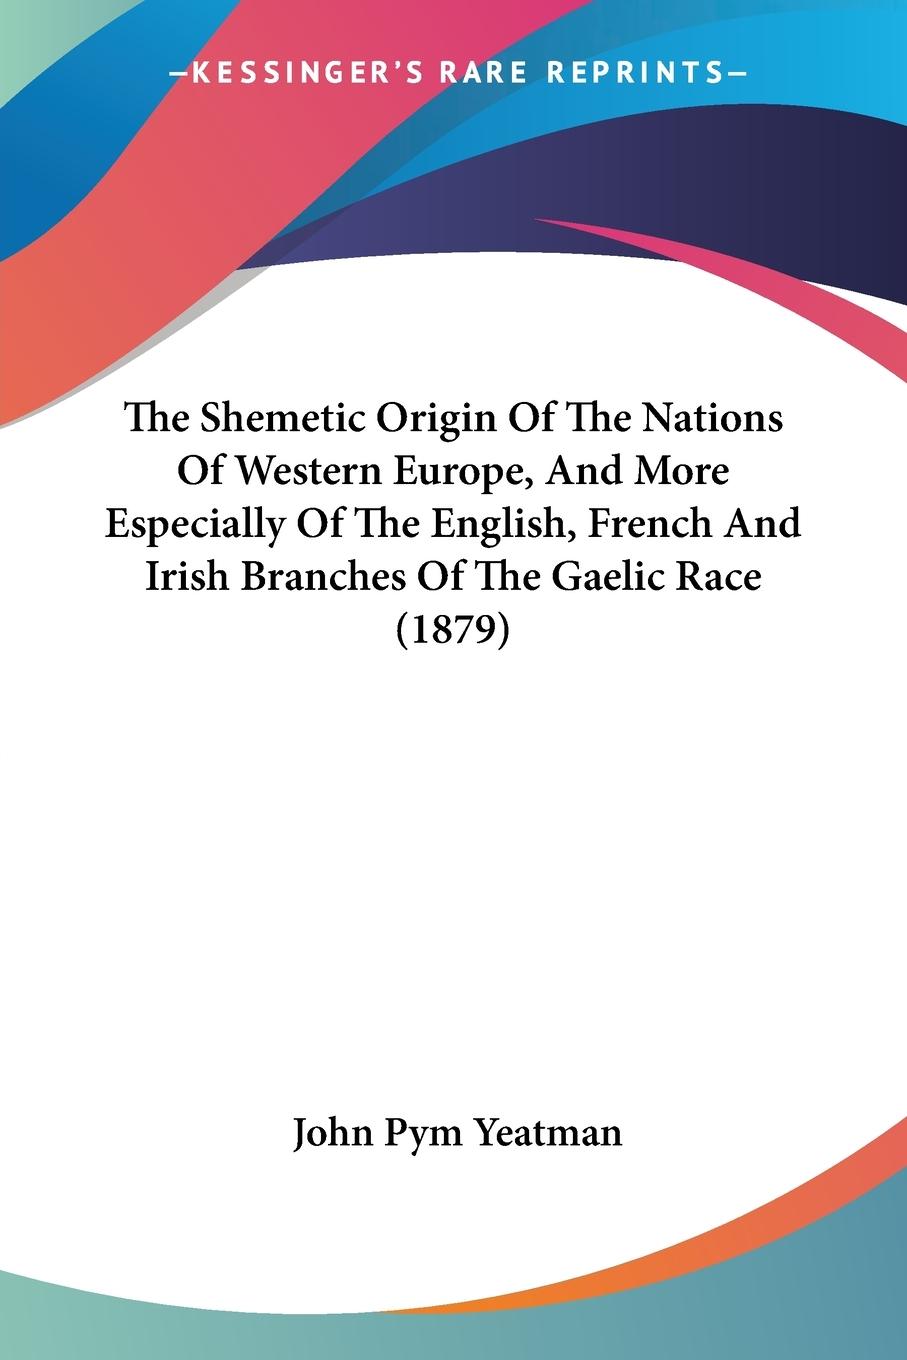 The Shemetic Origin Of The Nations Of Western Europe, And More Especially Of The English, French And Irish Branches Of The Gaelic Race (1879) - Yeatman, John Pym